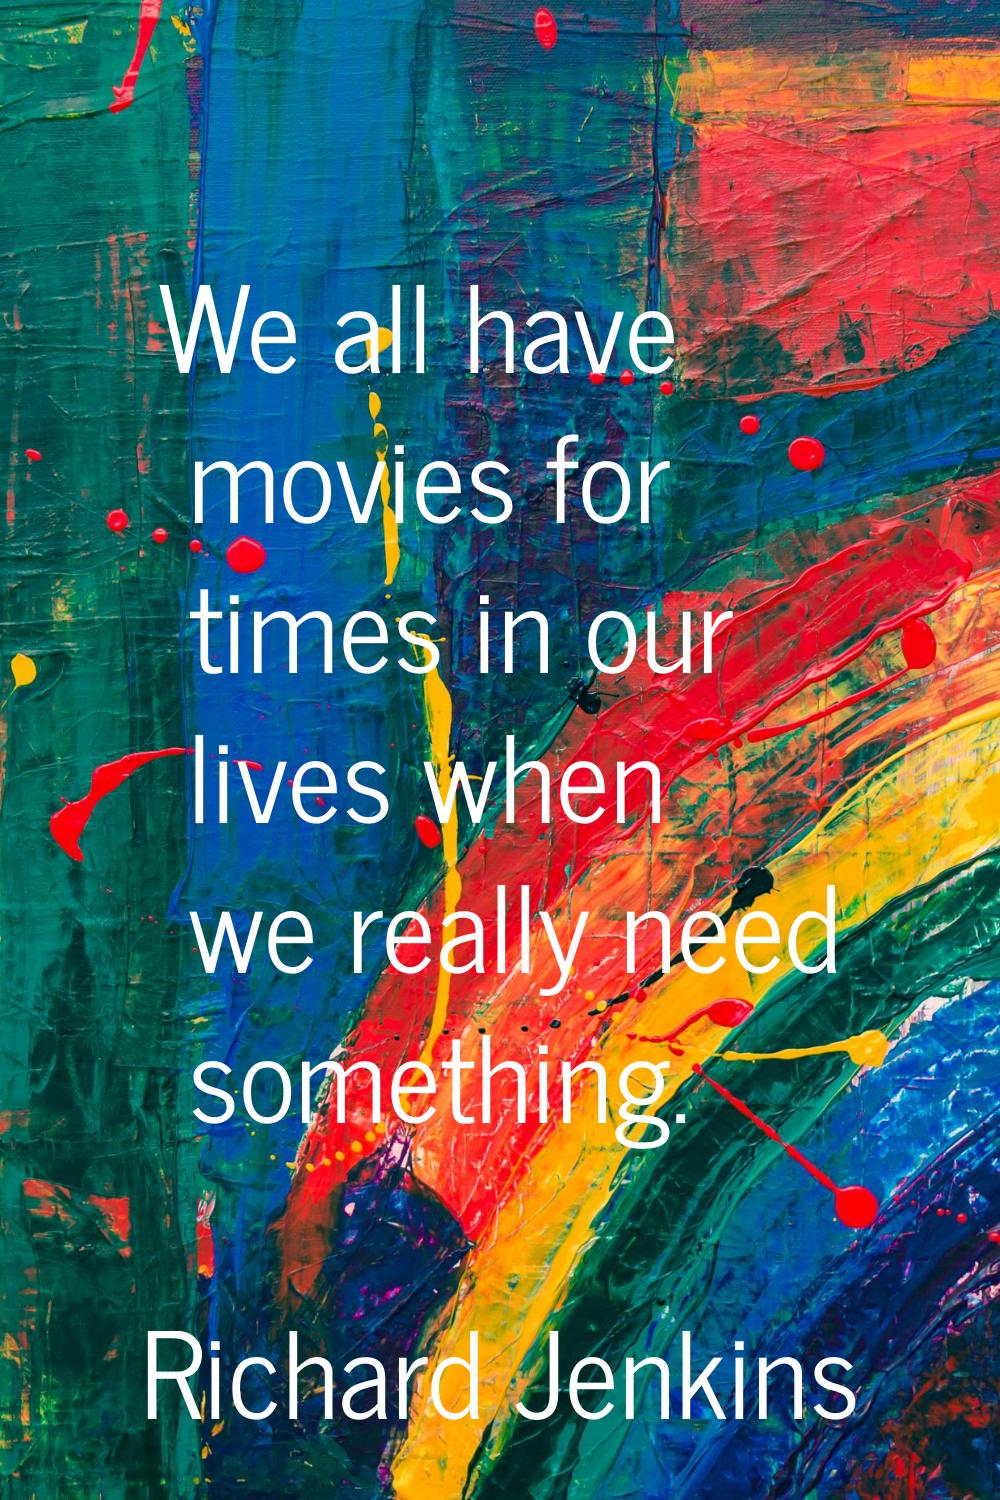 We all have movies for times in our lives when we really need something.